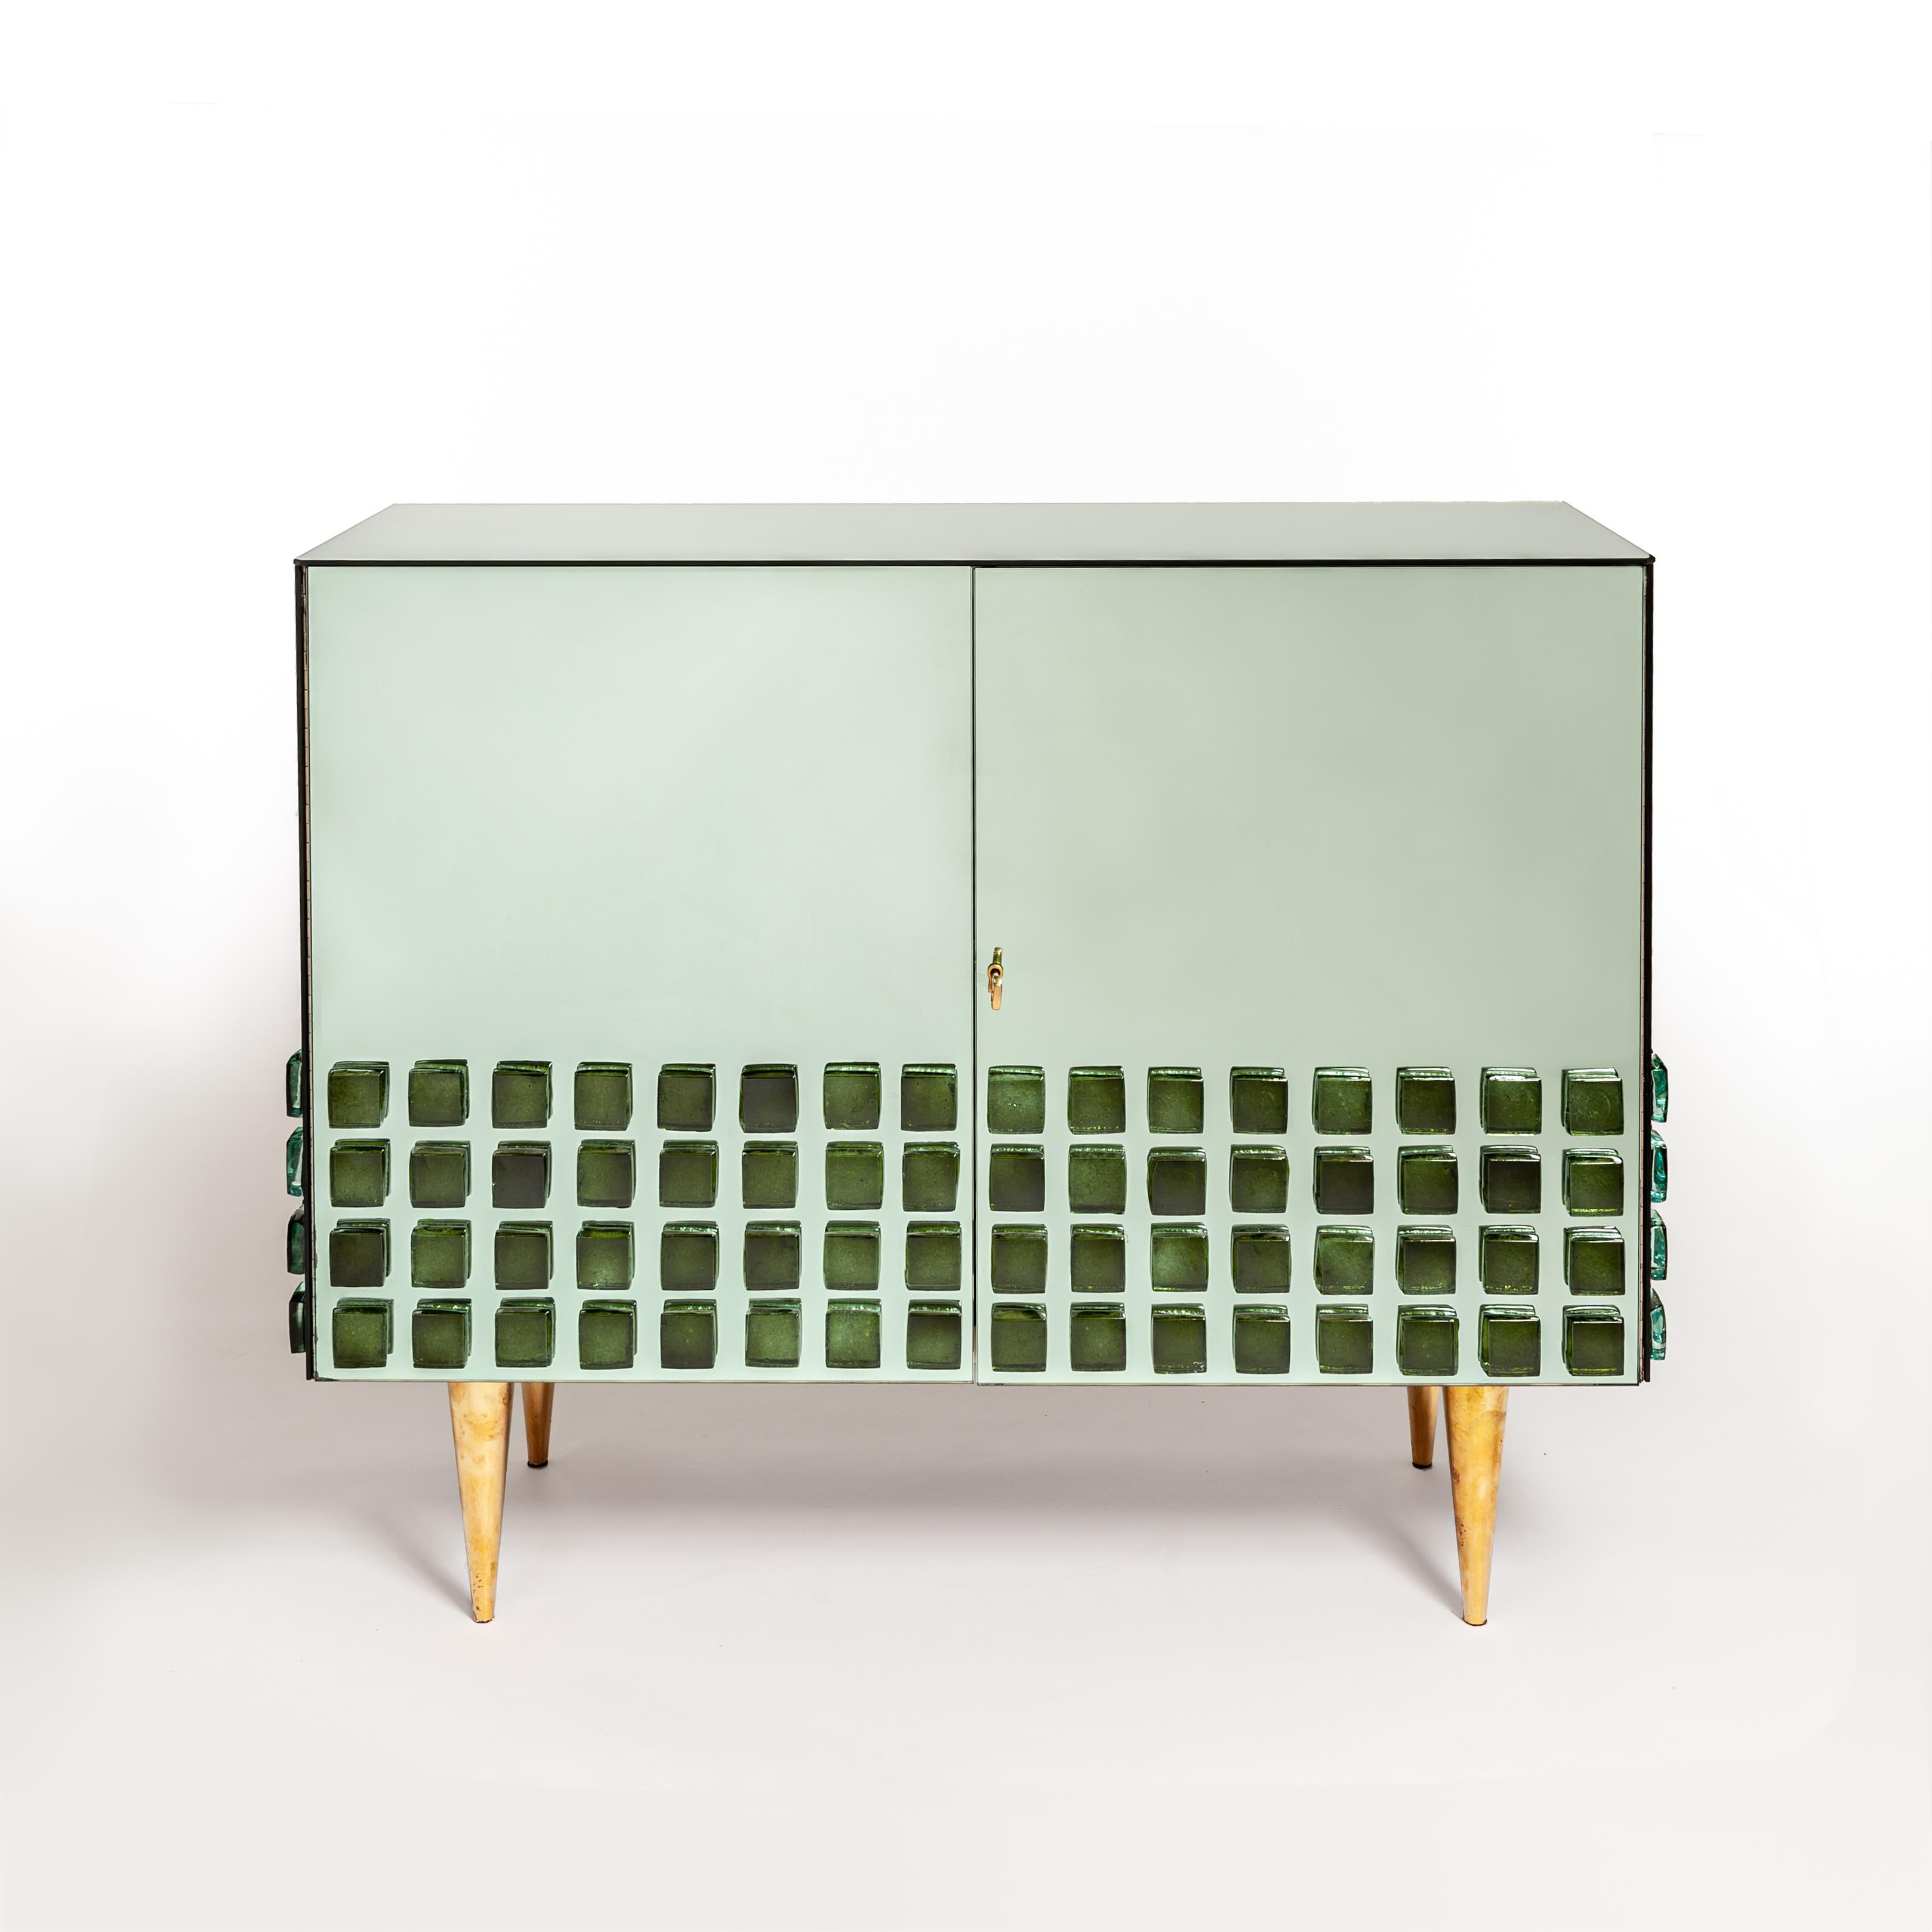 Italian 2-doors mirrored sideboard in the style of Roberto Giulio Rida.
Solid wooden body in beechwood veneered with green mirror glass - all edges are faceted.
In the lower third, hand-cast thick opal glass stones (medallions) in emerald green are